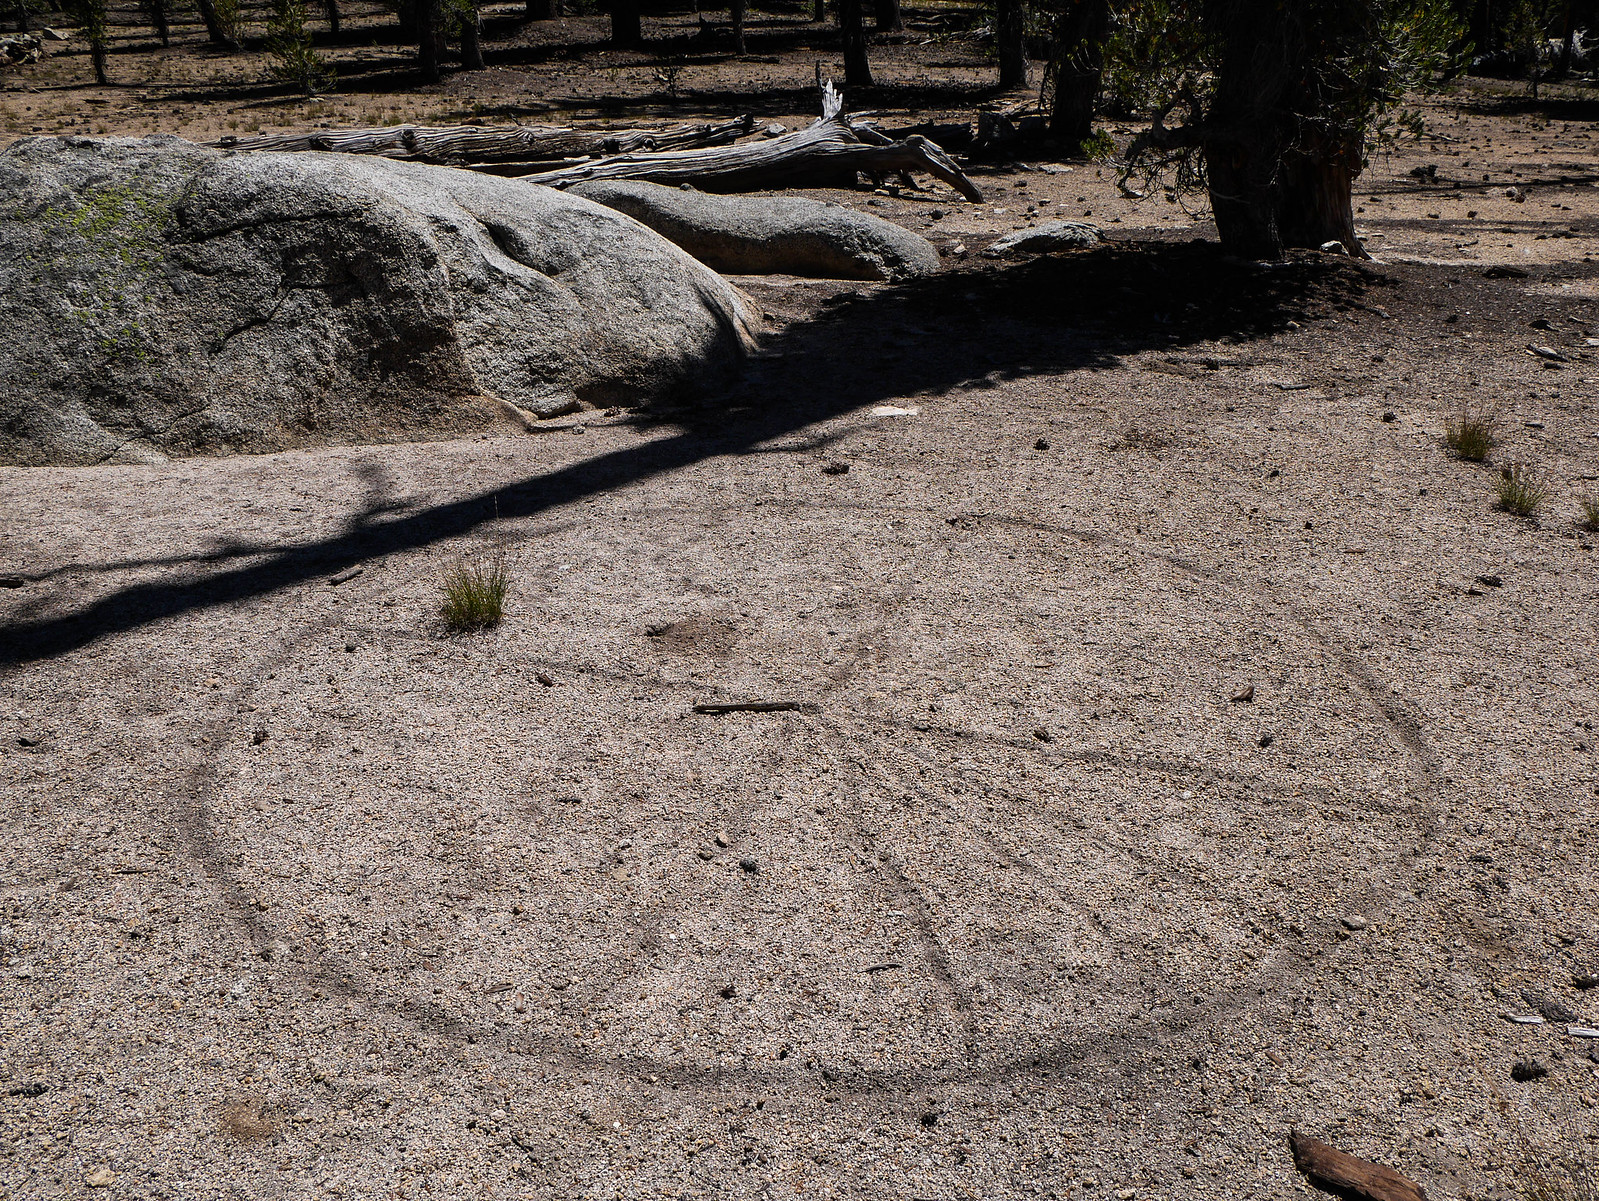 I wanted to think this was some kind of pagan symbol but now I think it's an attempted sundial?